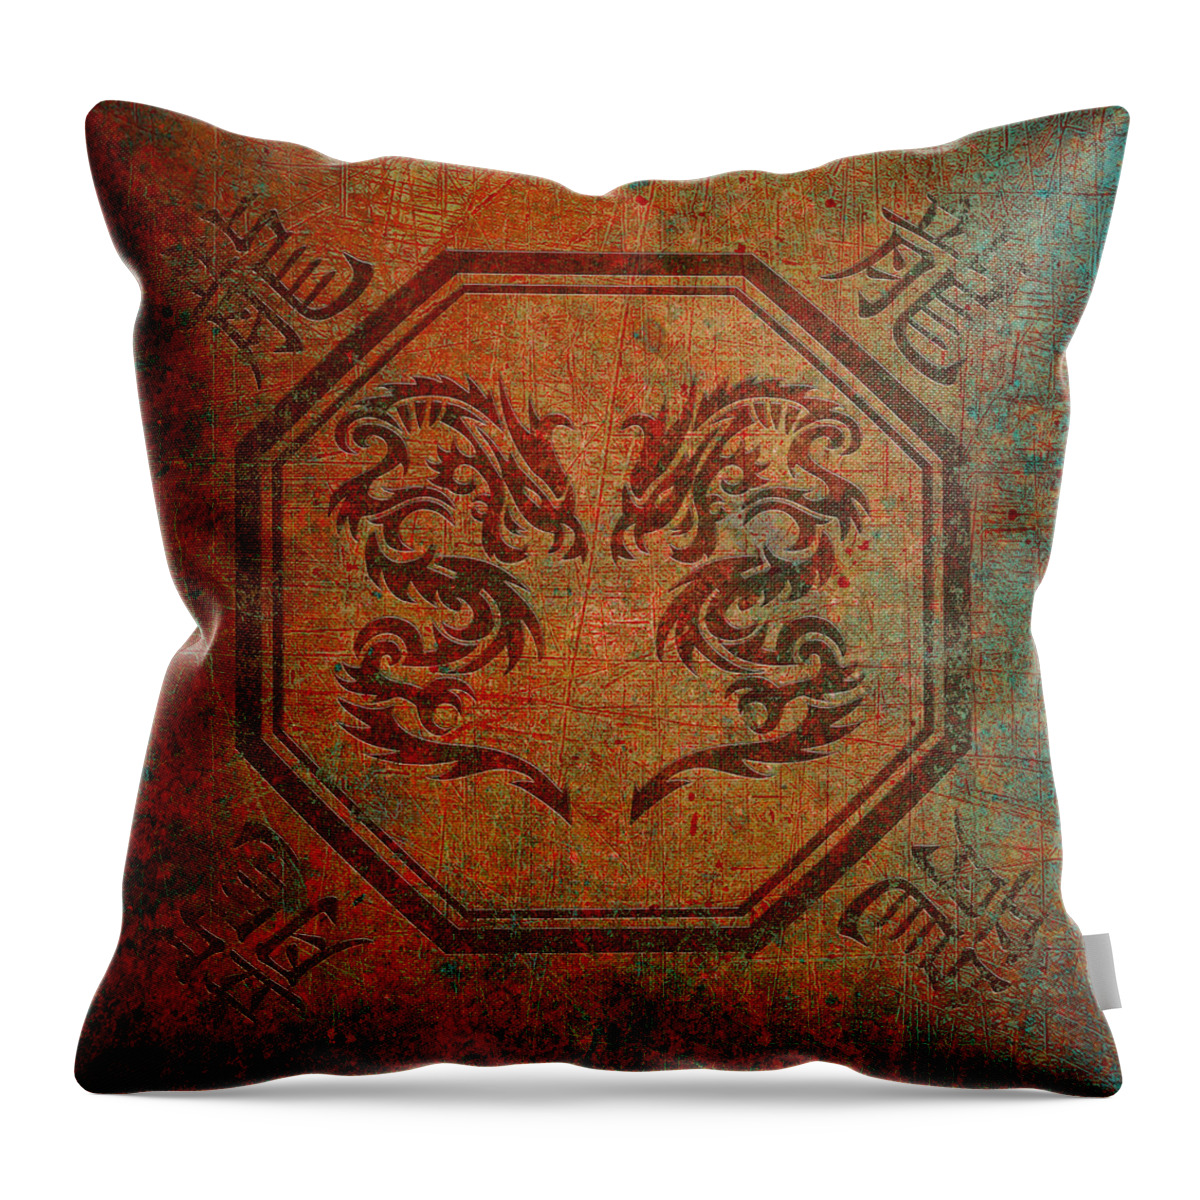 Chinese Throw Pillow featuring the digital art Dueling Dragons In An Octagon Frame With Chinese Dragon Characters Yellow Tint Distressed by Fred Bertheas